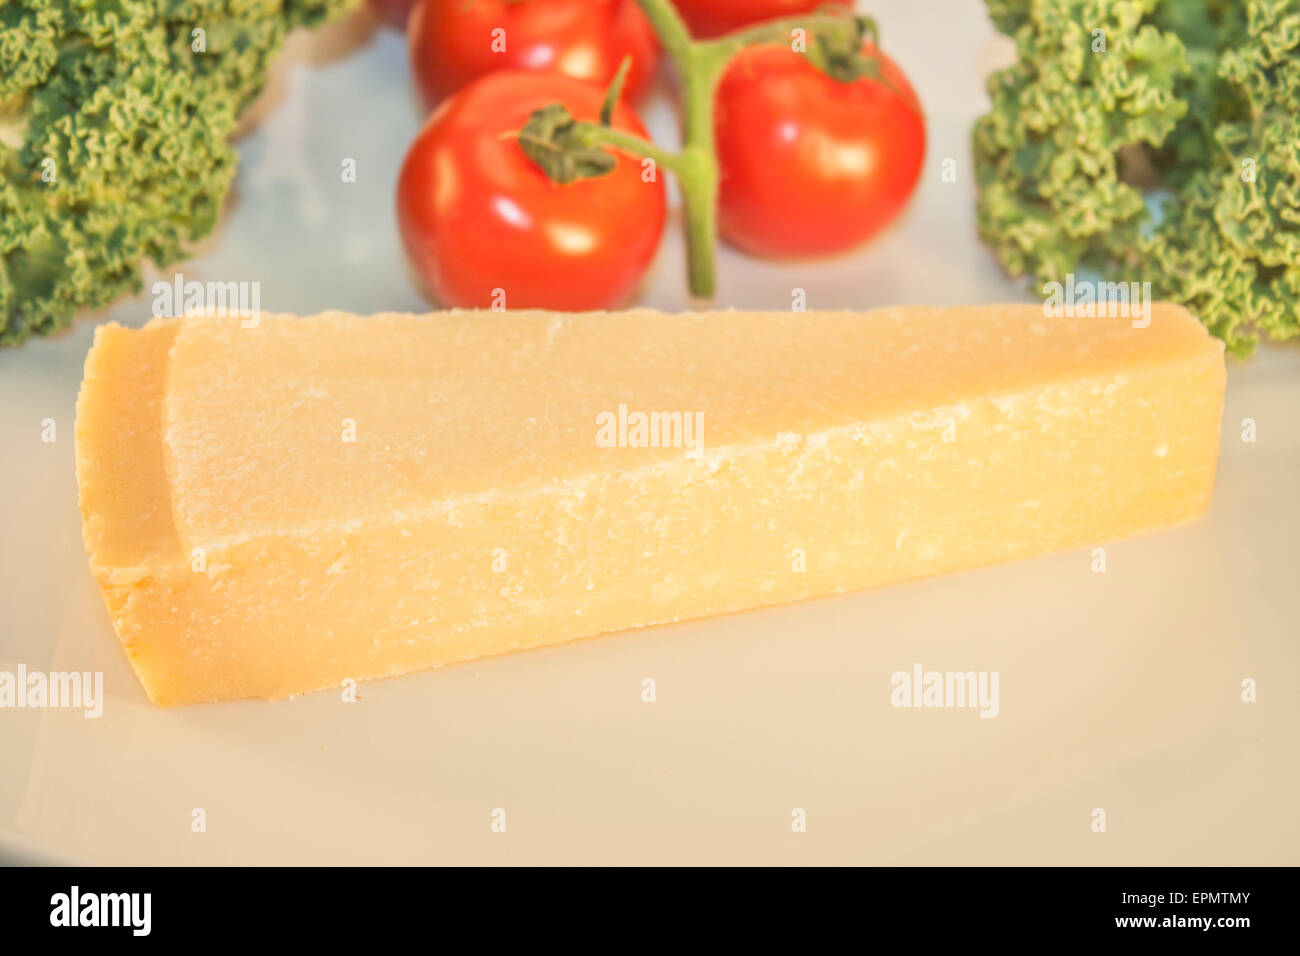 A parmesan wedge, in front of tomatoes and kale Stock Photo